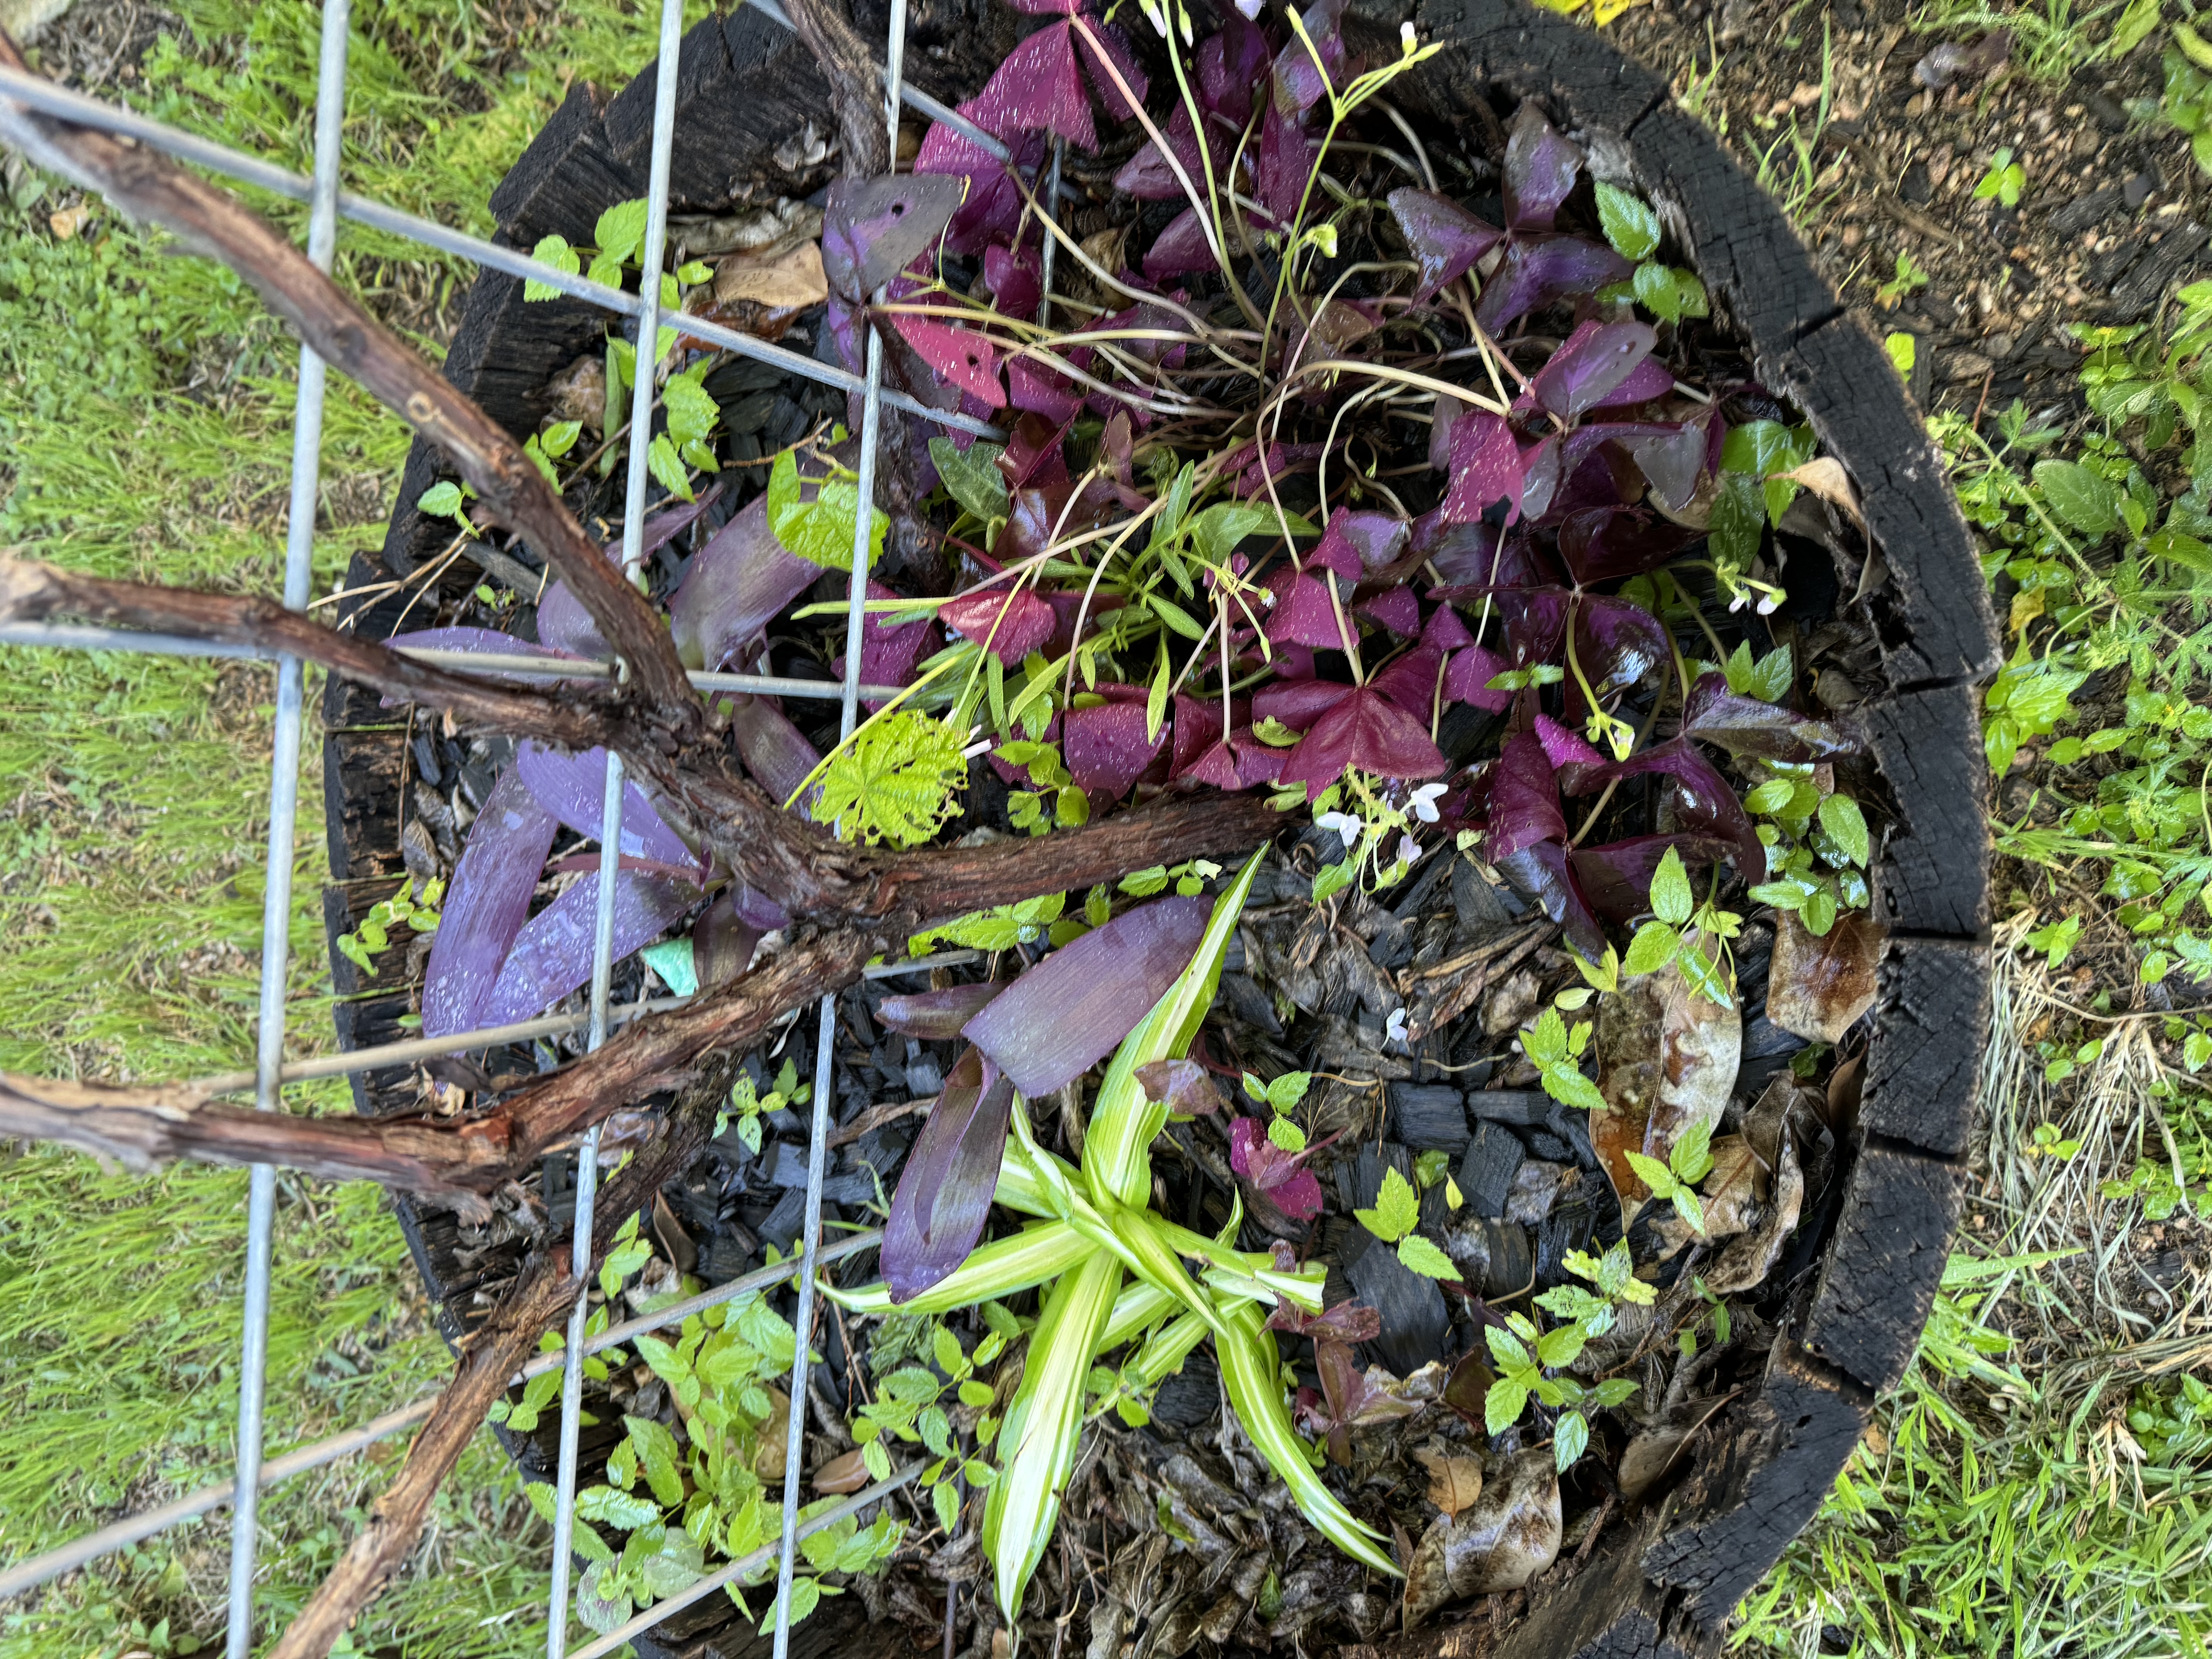 A vibrant photo of a garden bed rich with diverse plant life, including green and purple leaves, showcasing various stages of growth and decomposition amidst a backdrop of dark soil and a wire support structure.